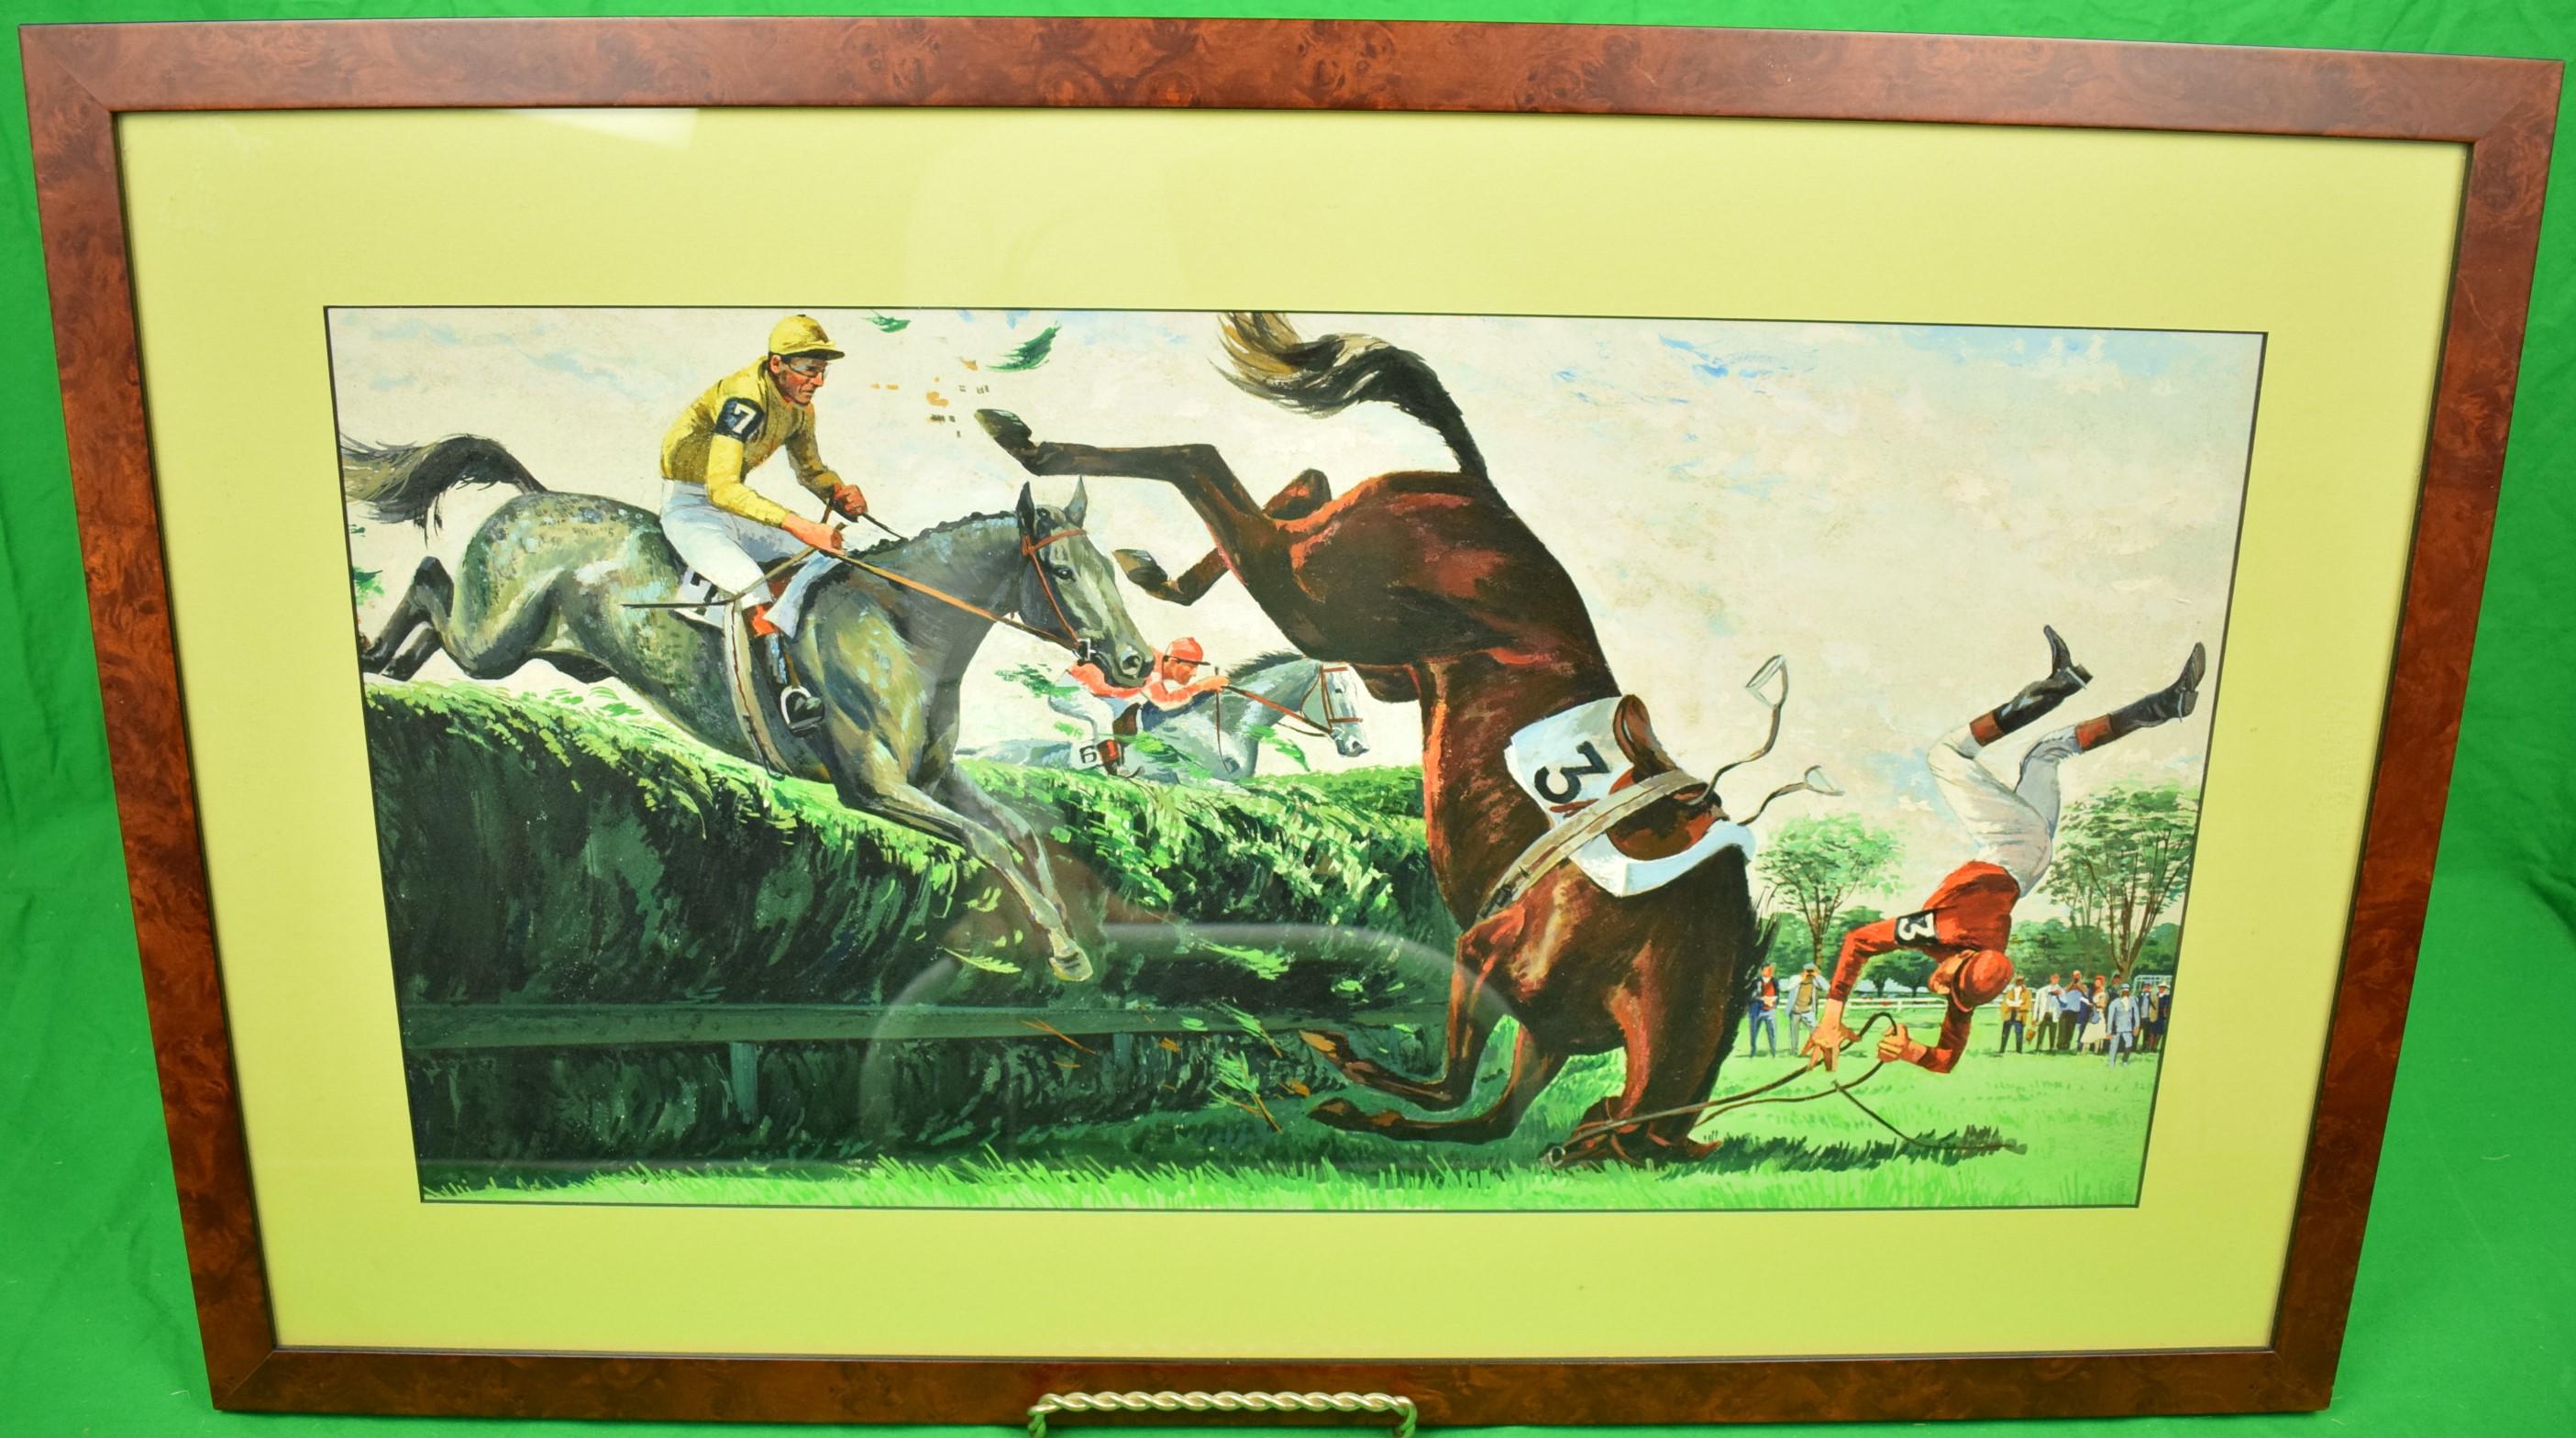 "Three Steeplechase Jockeys Timber Jumping" Acrylic Painting - Art by Unknown